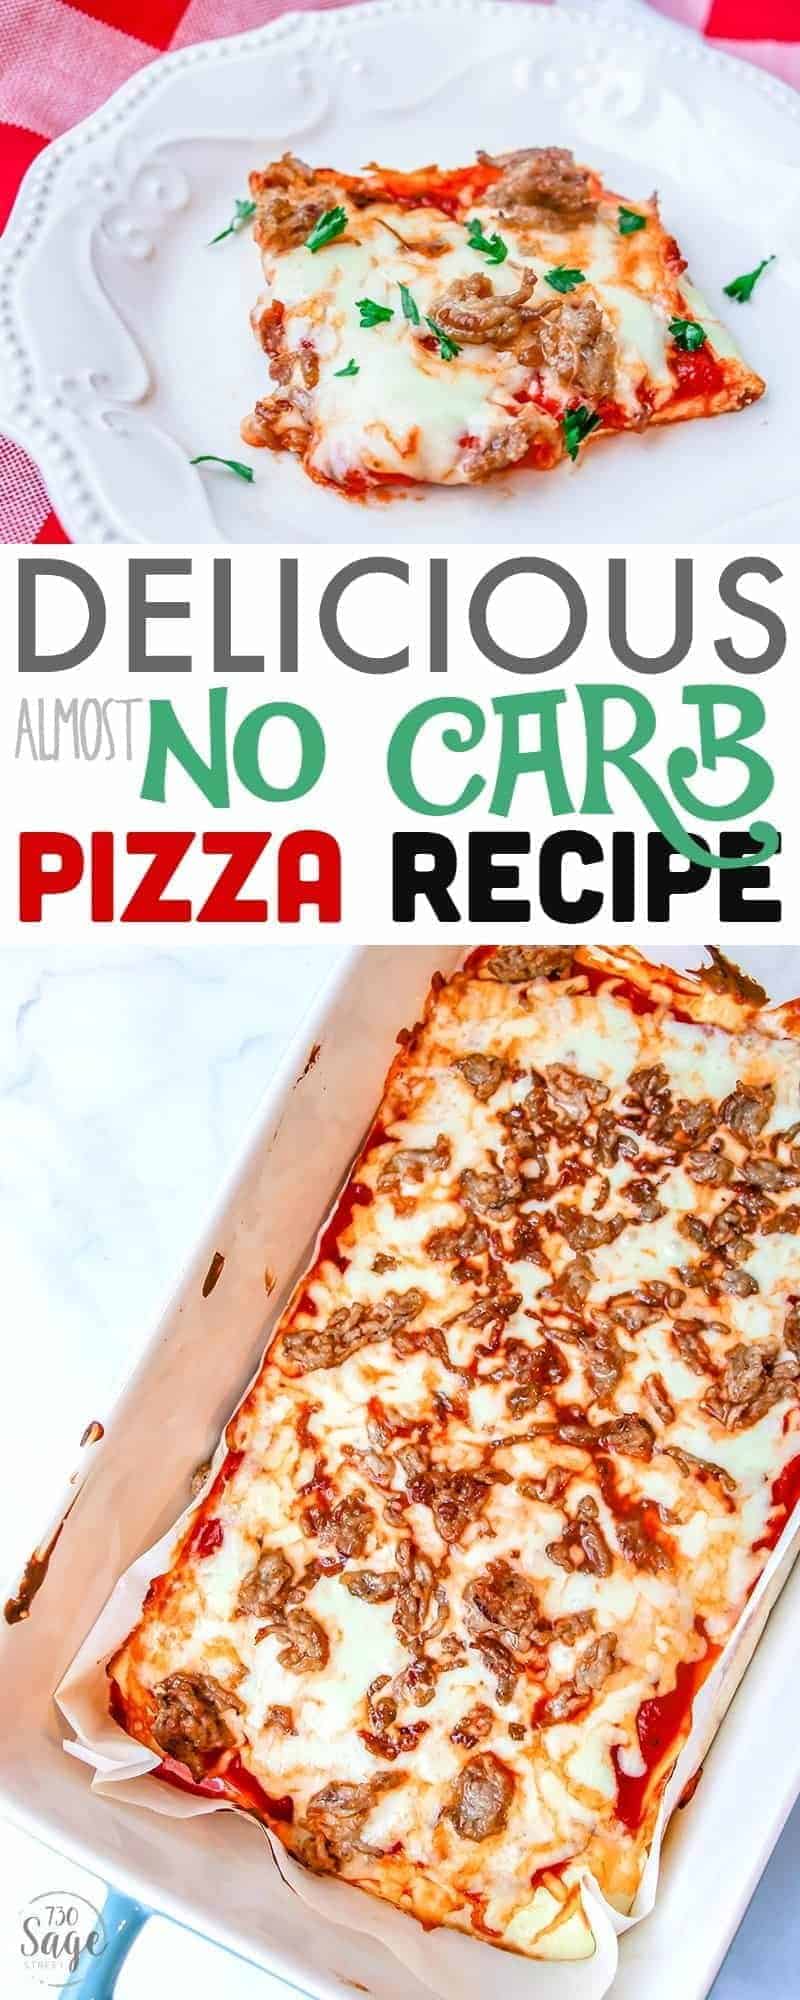 no carb pizza photo collage